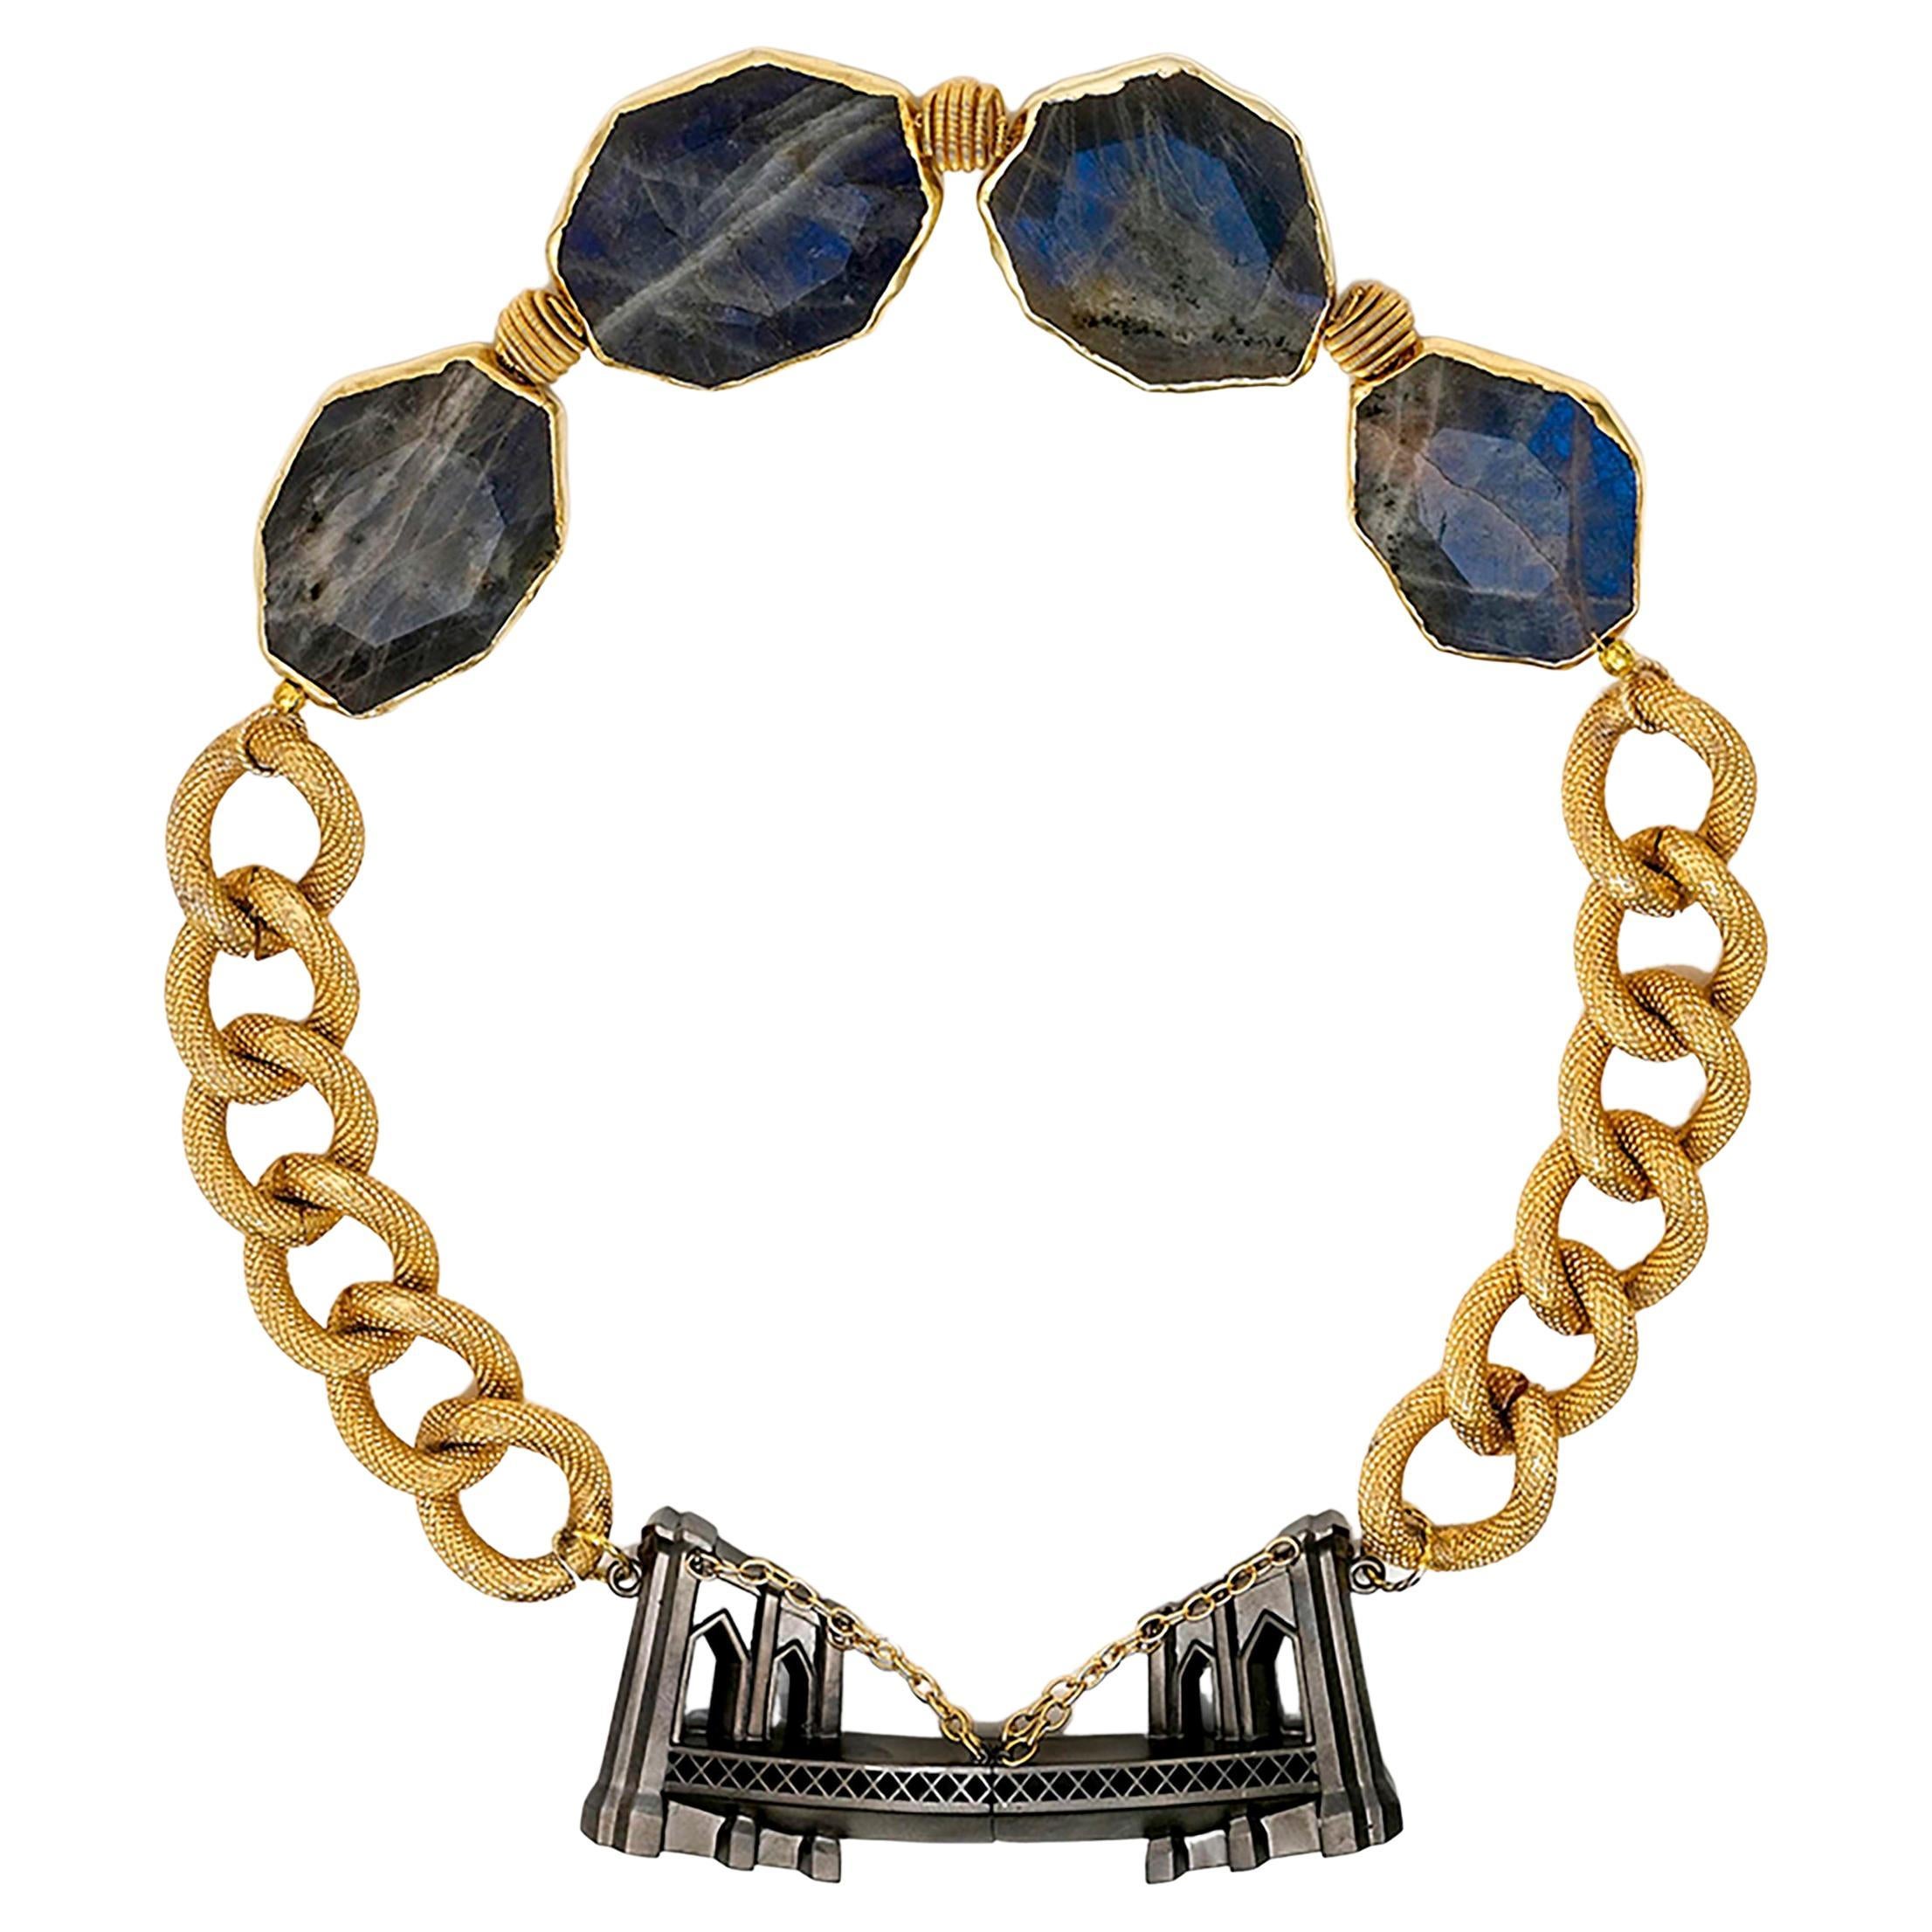 Samantha Siu NY 18k vermeil over silver reversible necklace with labradorite.